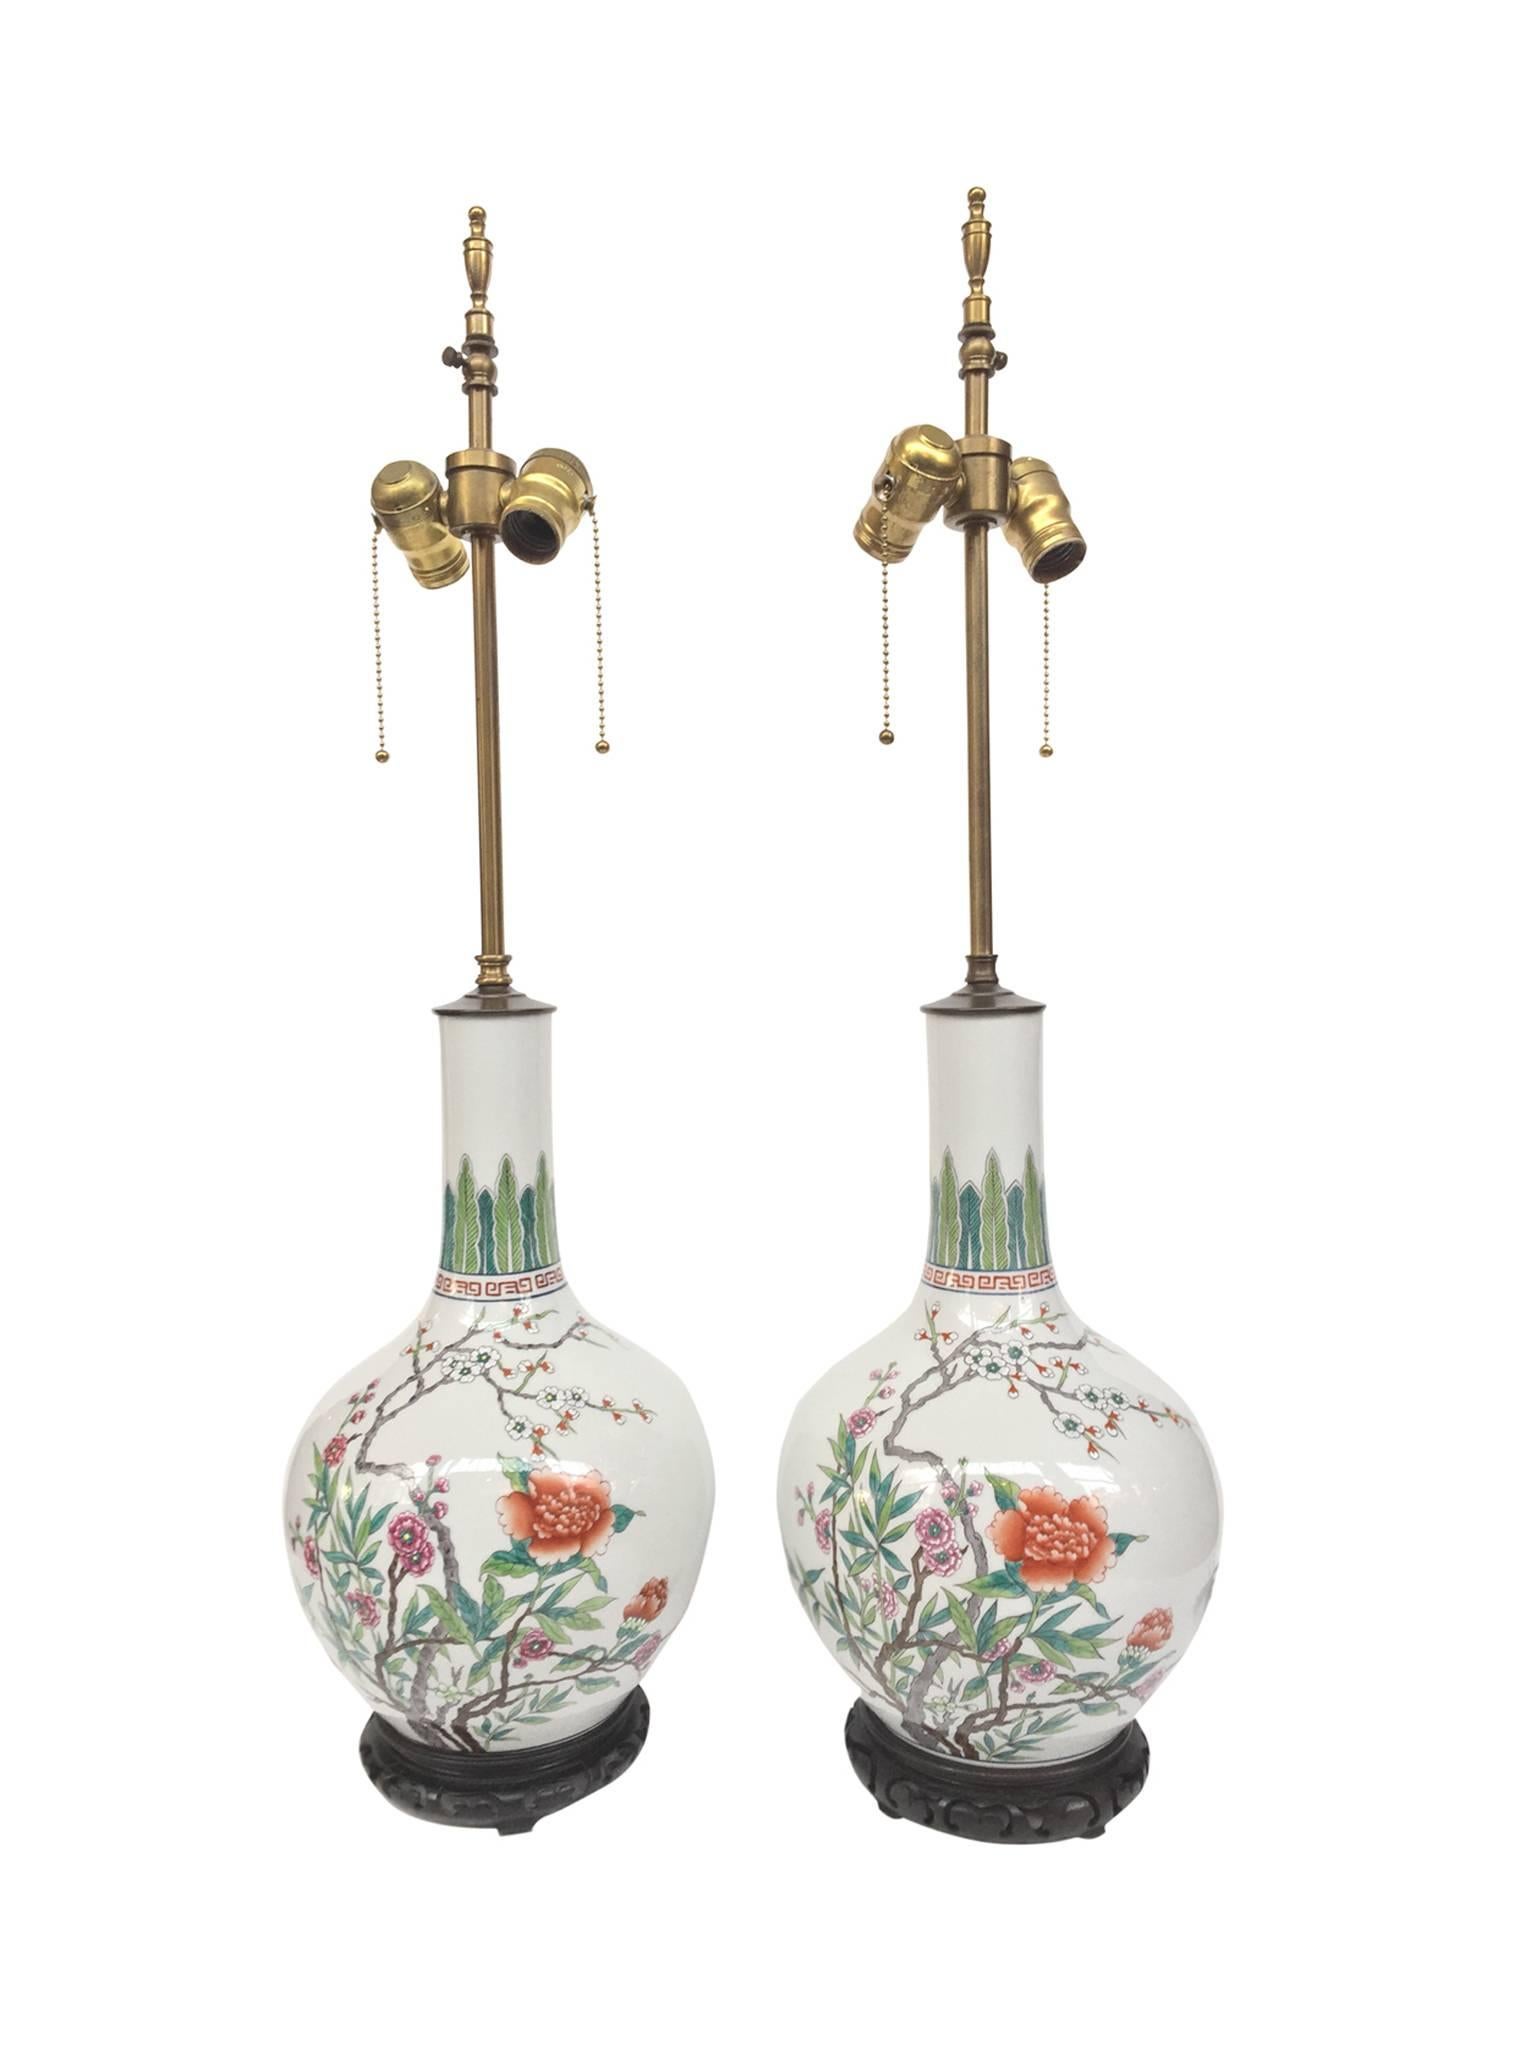 These white porcelain lamps are remarkable for their beautiful shape and design. Hand-painted floral motifs decorate the round body while a band of leaves encircle the long stem. The lamps are newly rewired with new brass hardware and new white